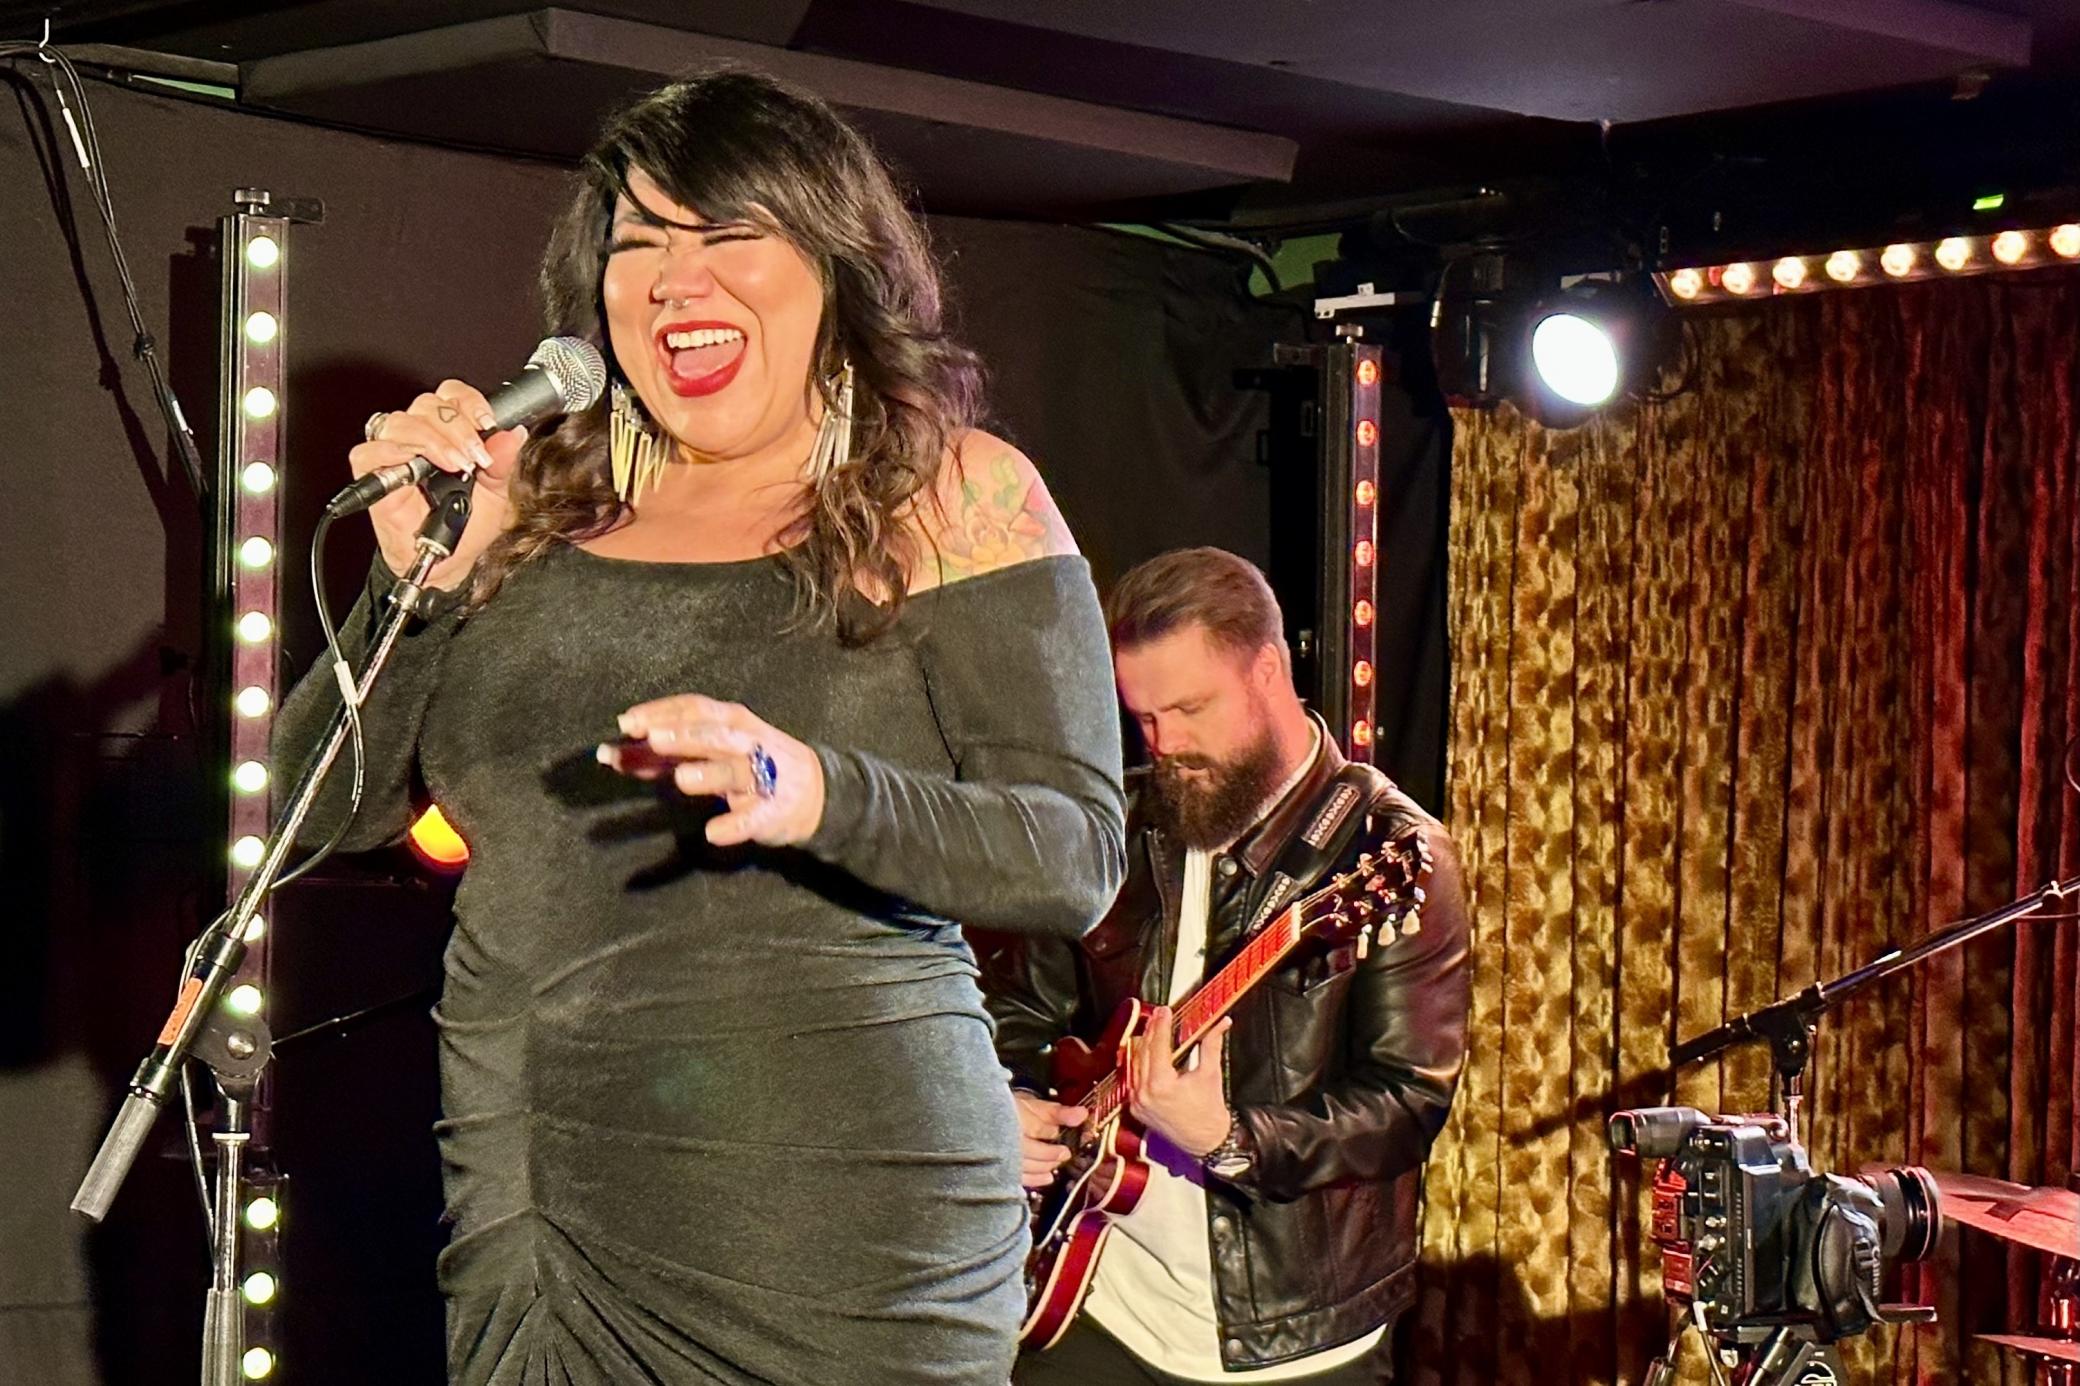  A woman in a black dress sings into a microphone as a bearded man plays guitar behind her on stage in a basement venue. 